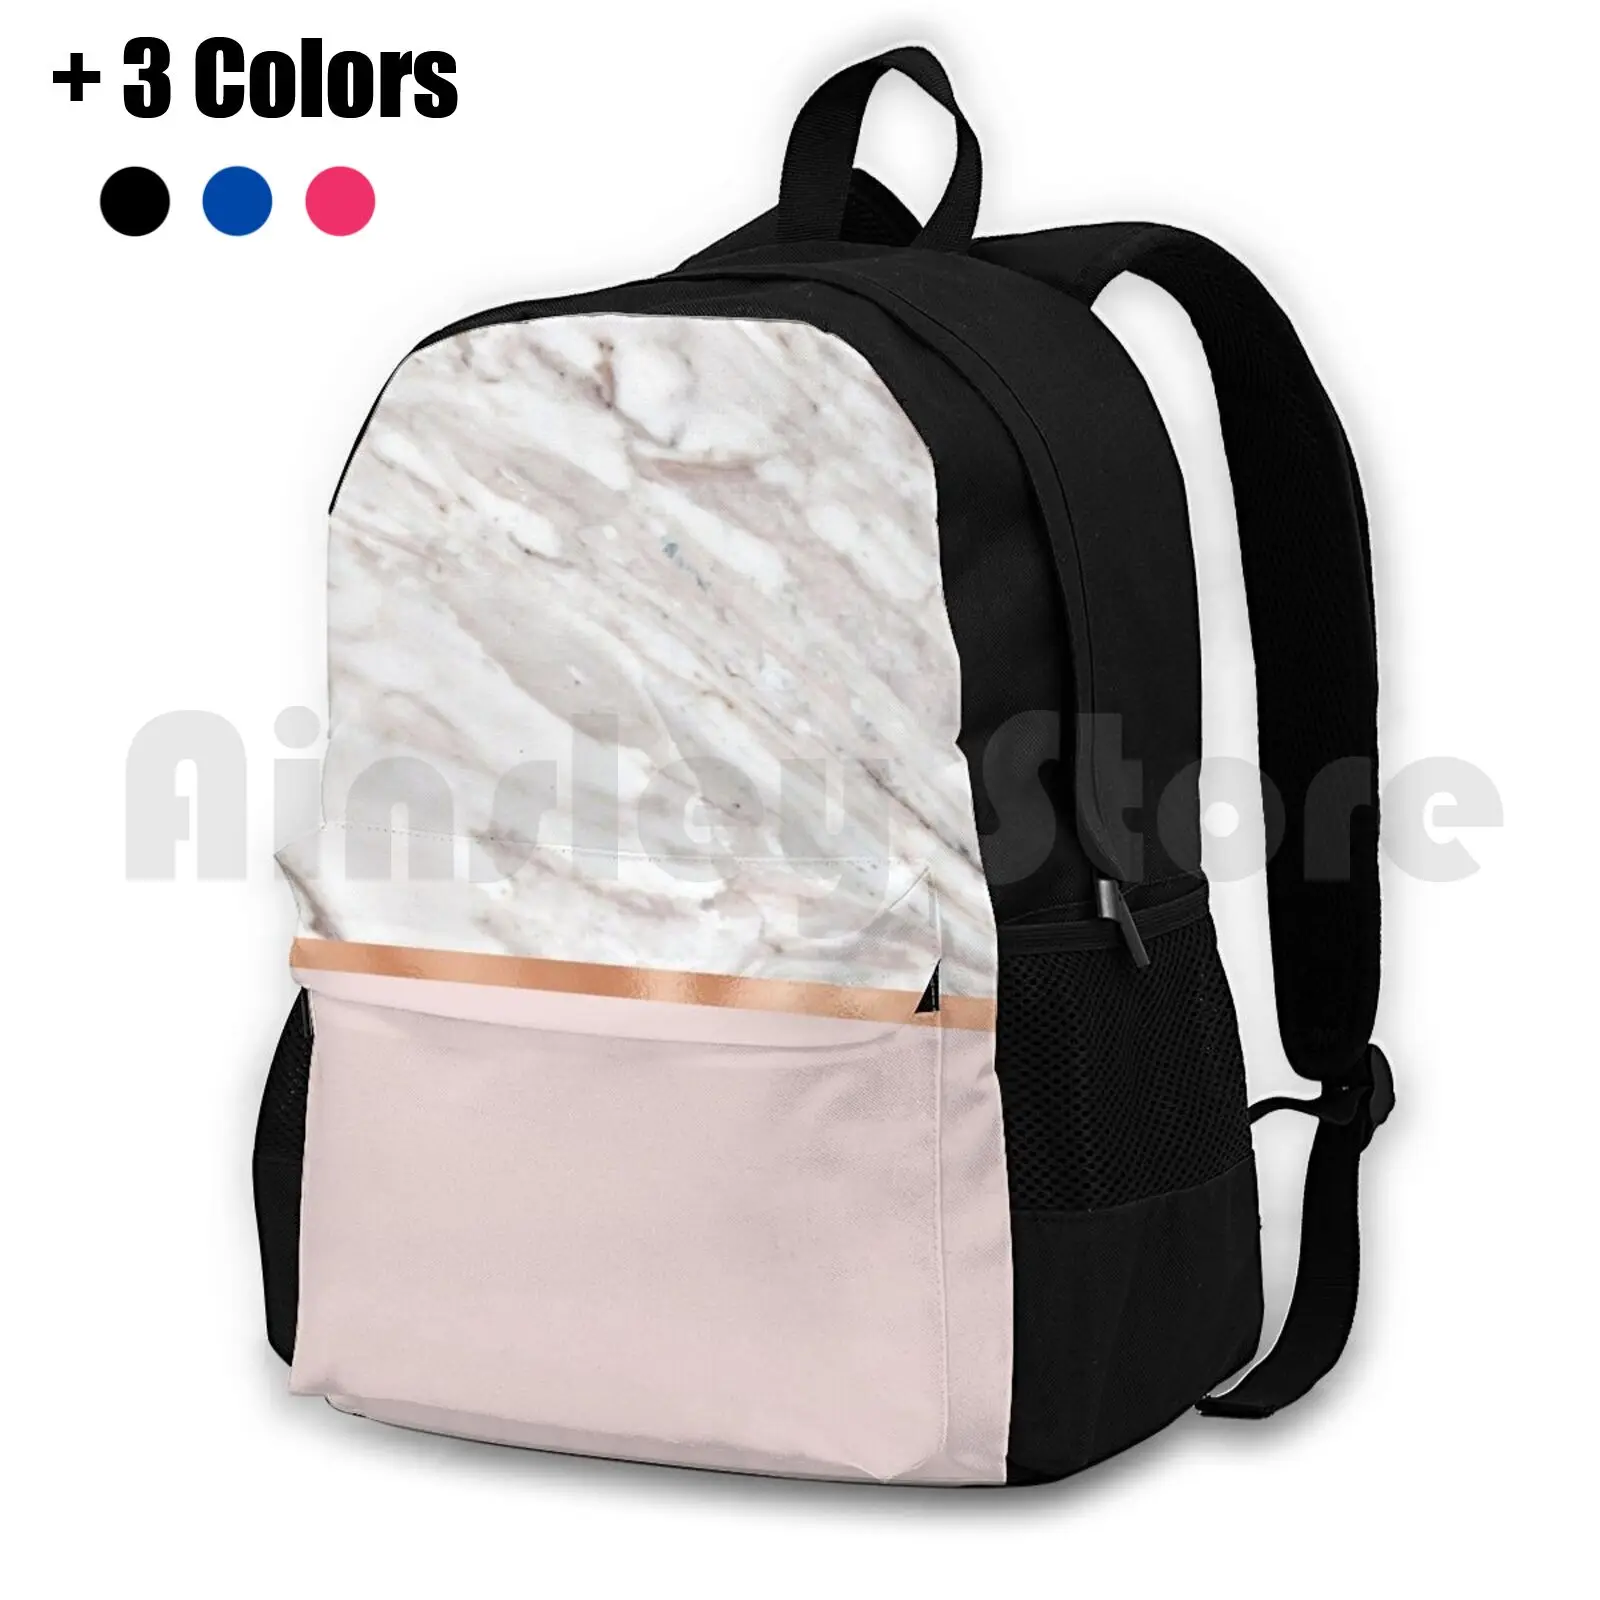 

Calacatta Marble On Rose Gold Blush Outdoor Hiking Backpack Waterproof Camping Travel Blush Peach Pink And White Pastel Gold